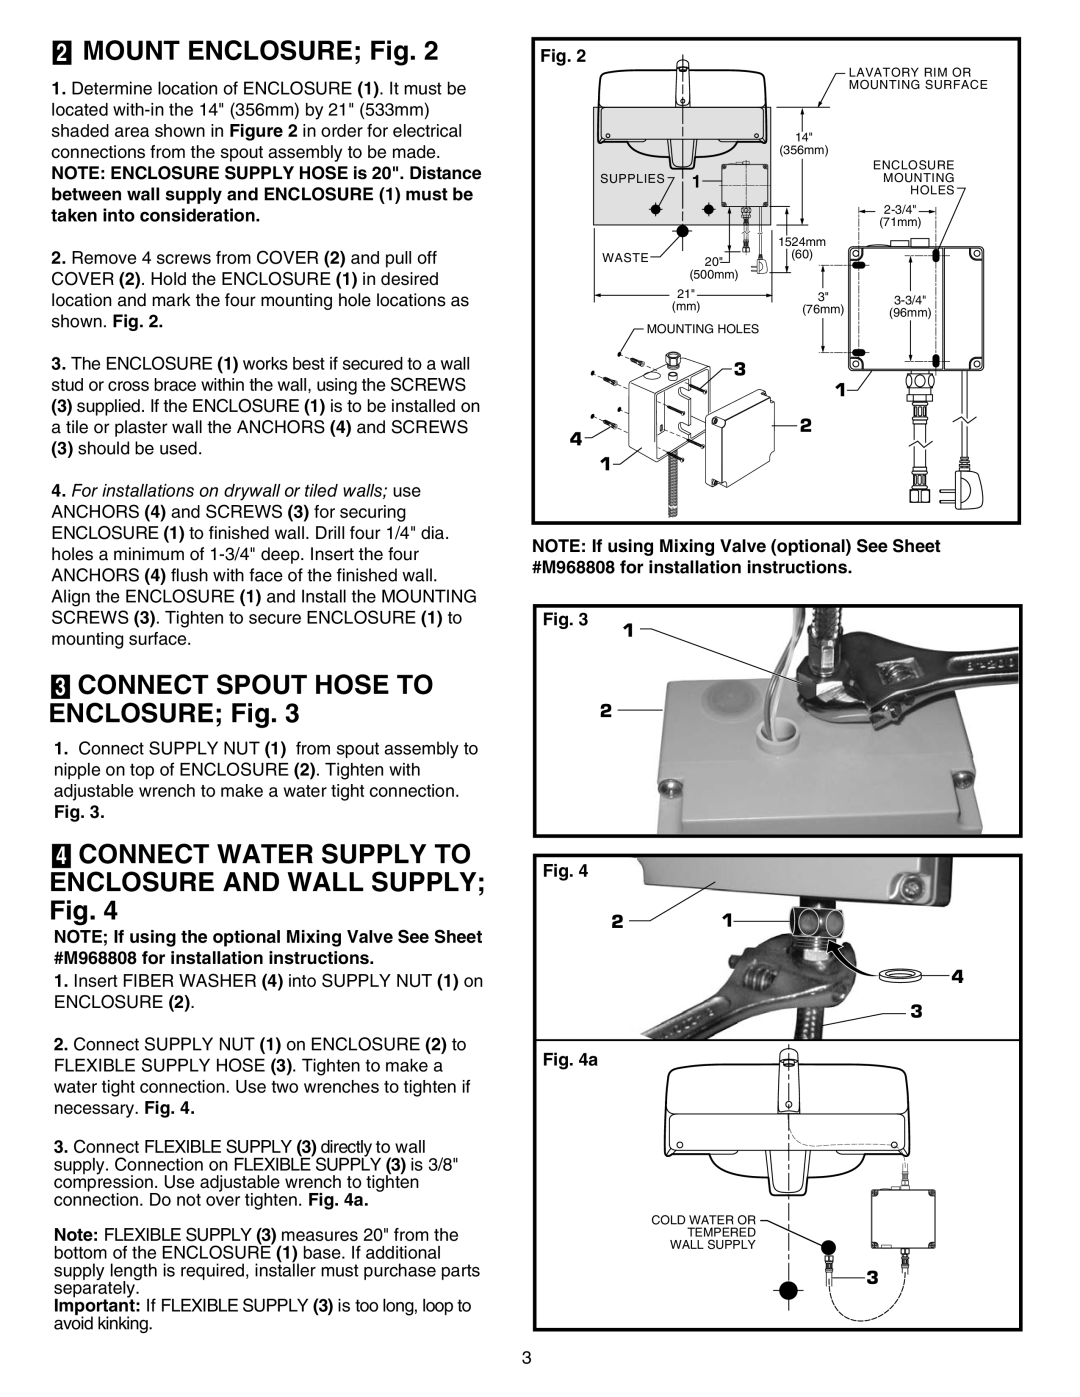 American Standard Proximity Faucet installation instructions MOUNT ENCLOSURE Fig, 3CONNECT SPOUT HOSE TO ENCLOSURE Fig 